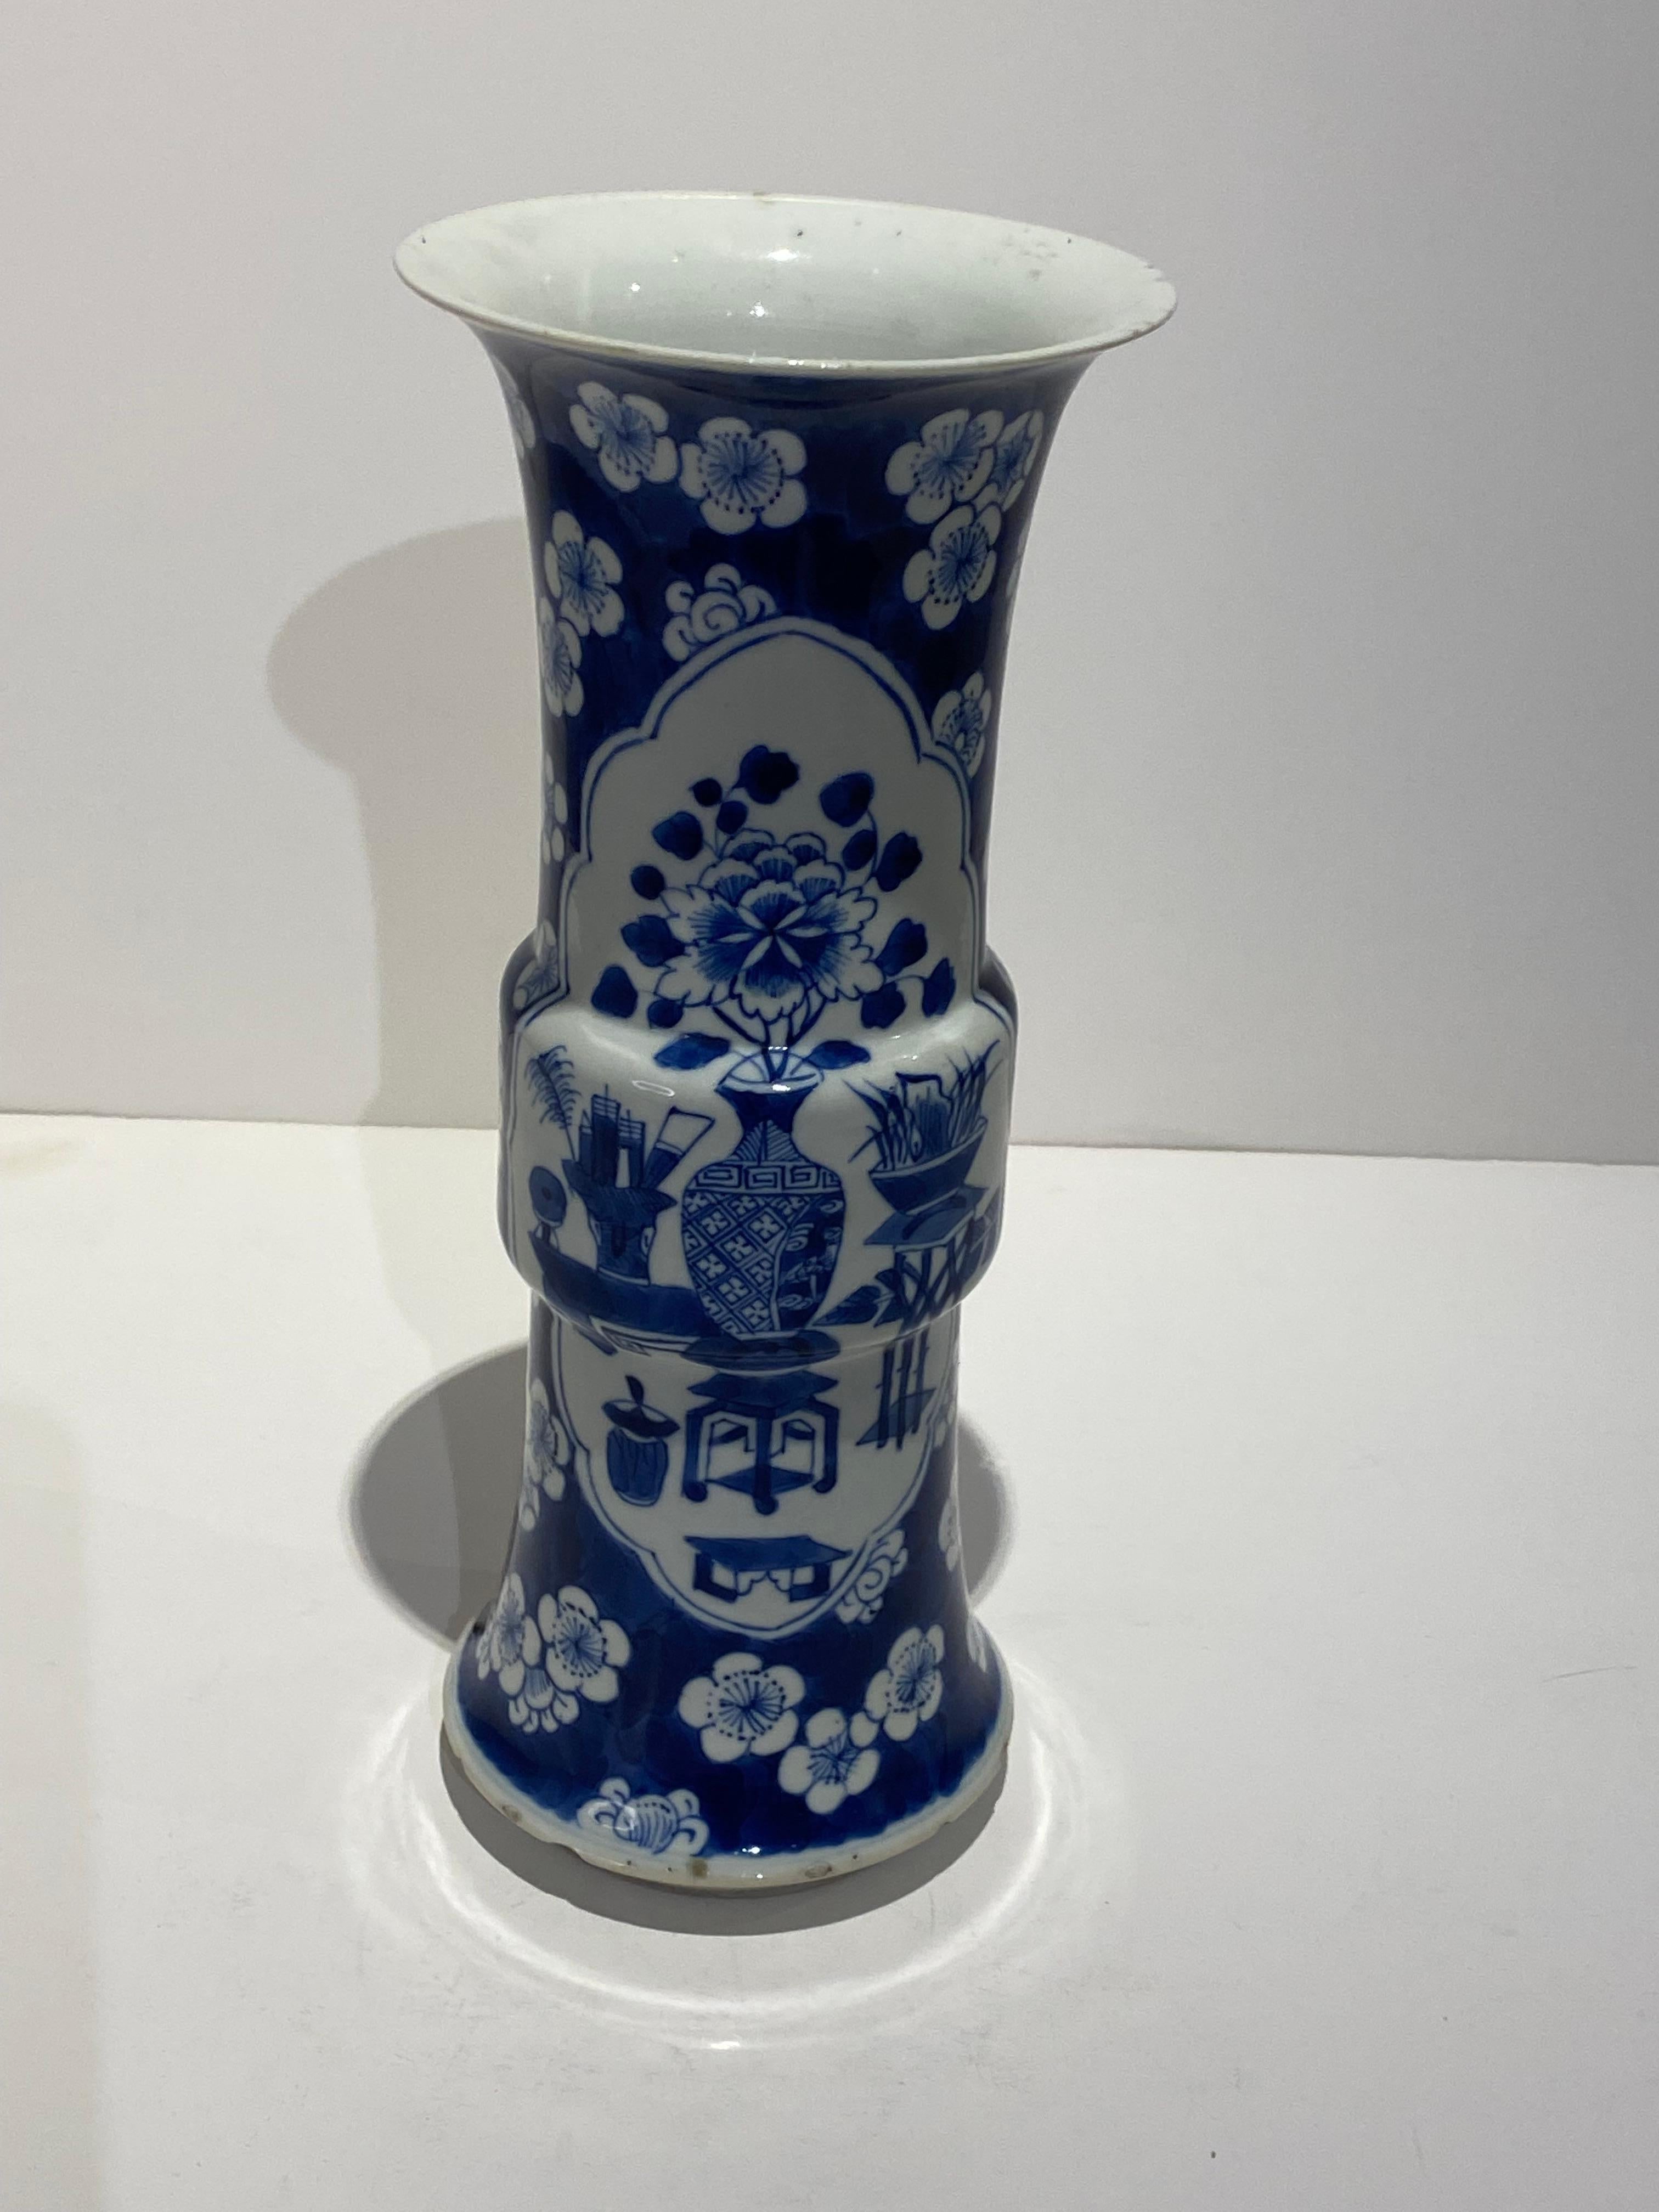 Old Decorative Chinese Hand Painted Blue & White Porcelain Vase.  Circa 1850.